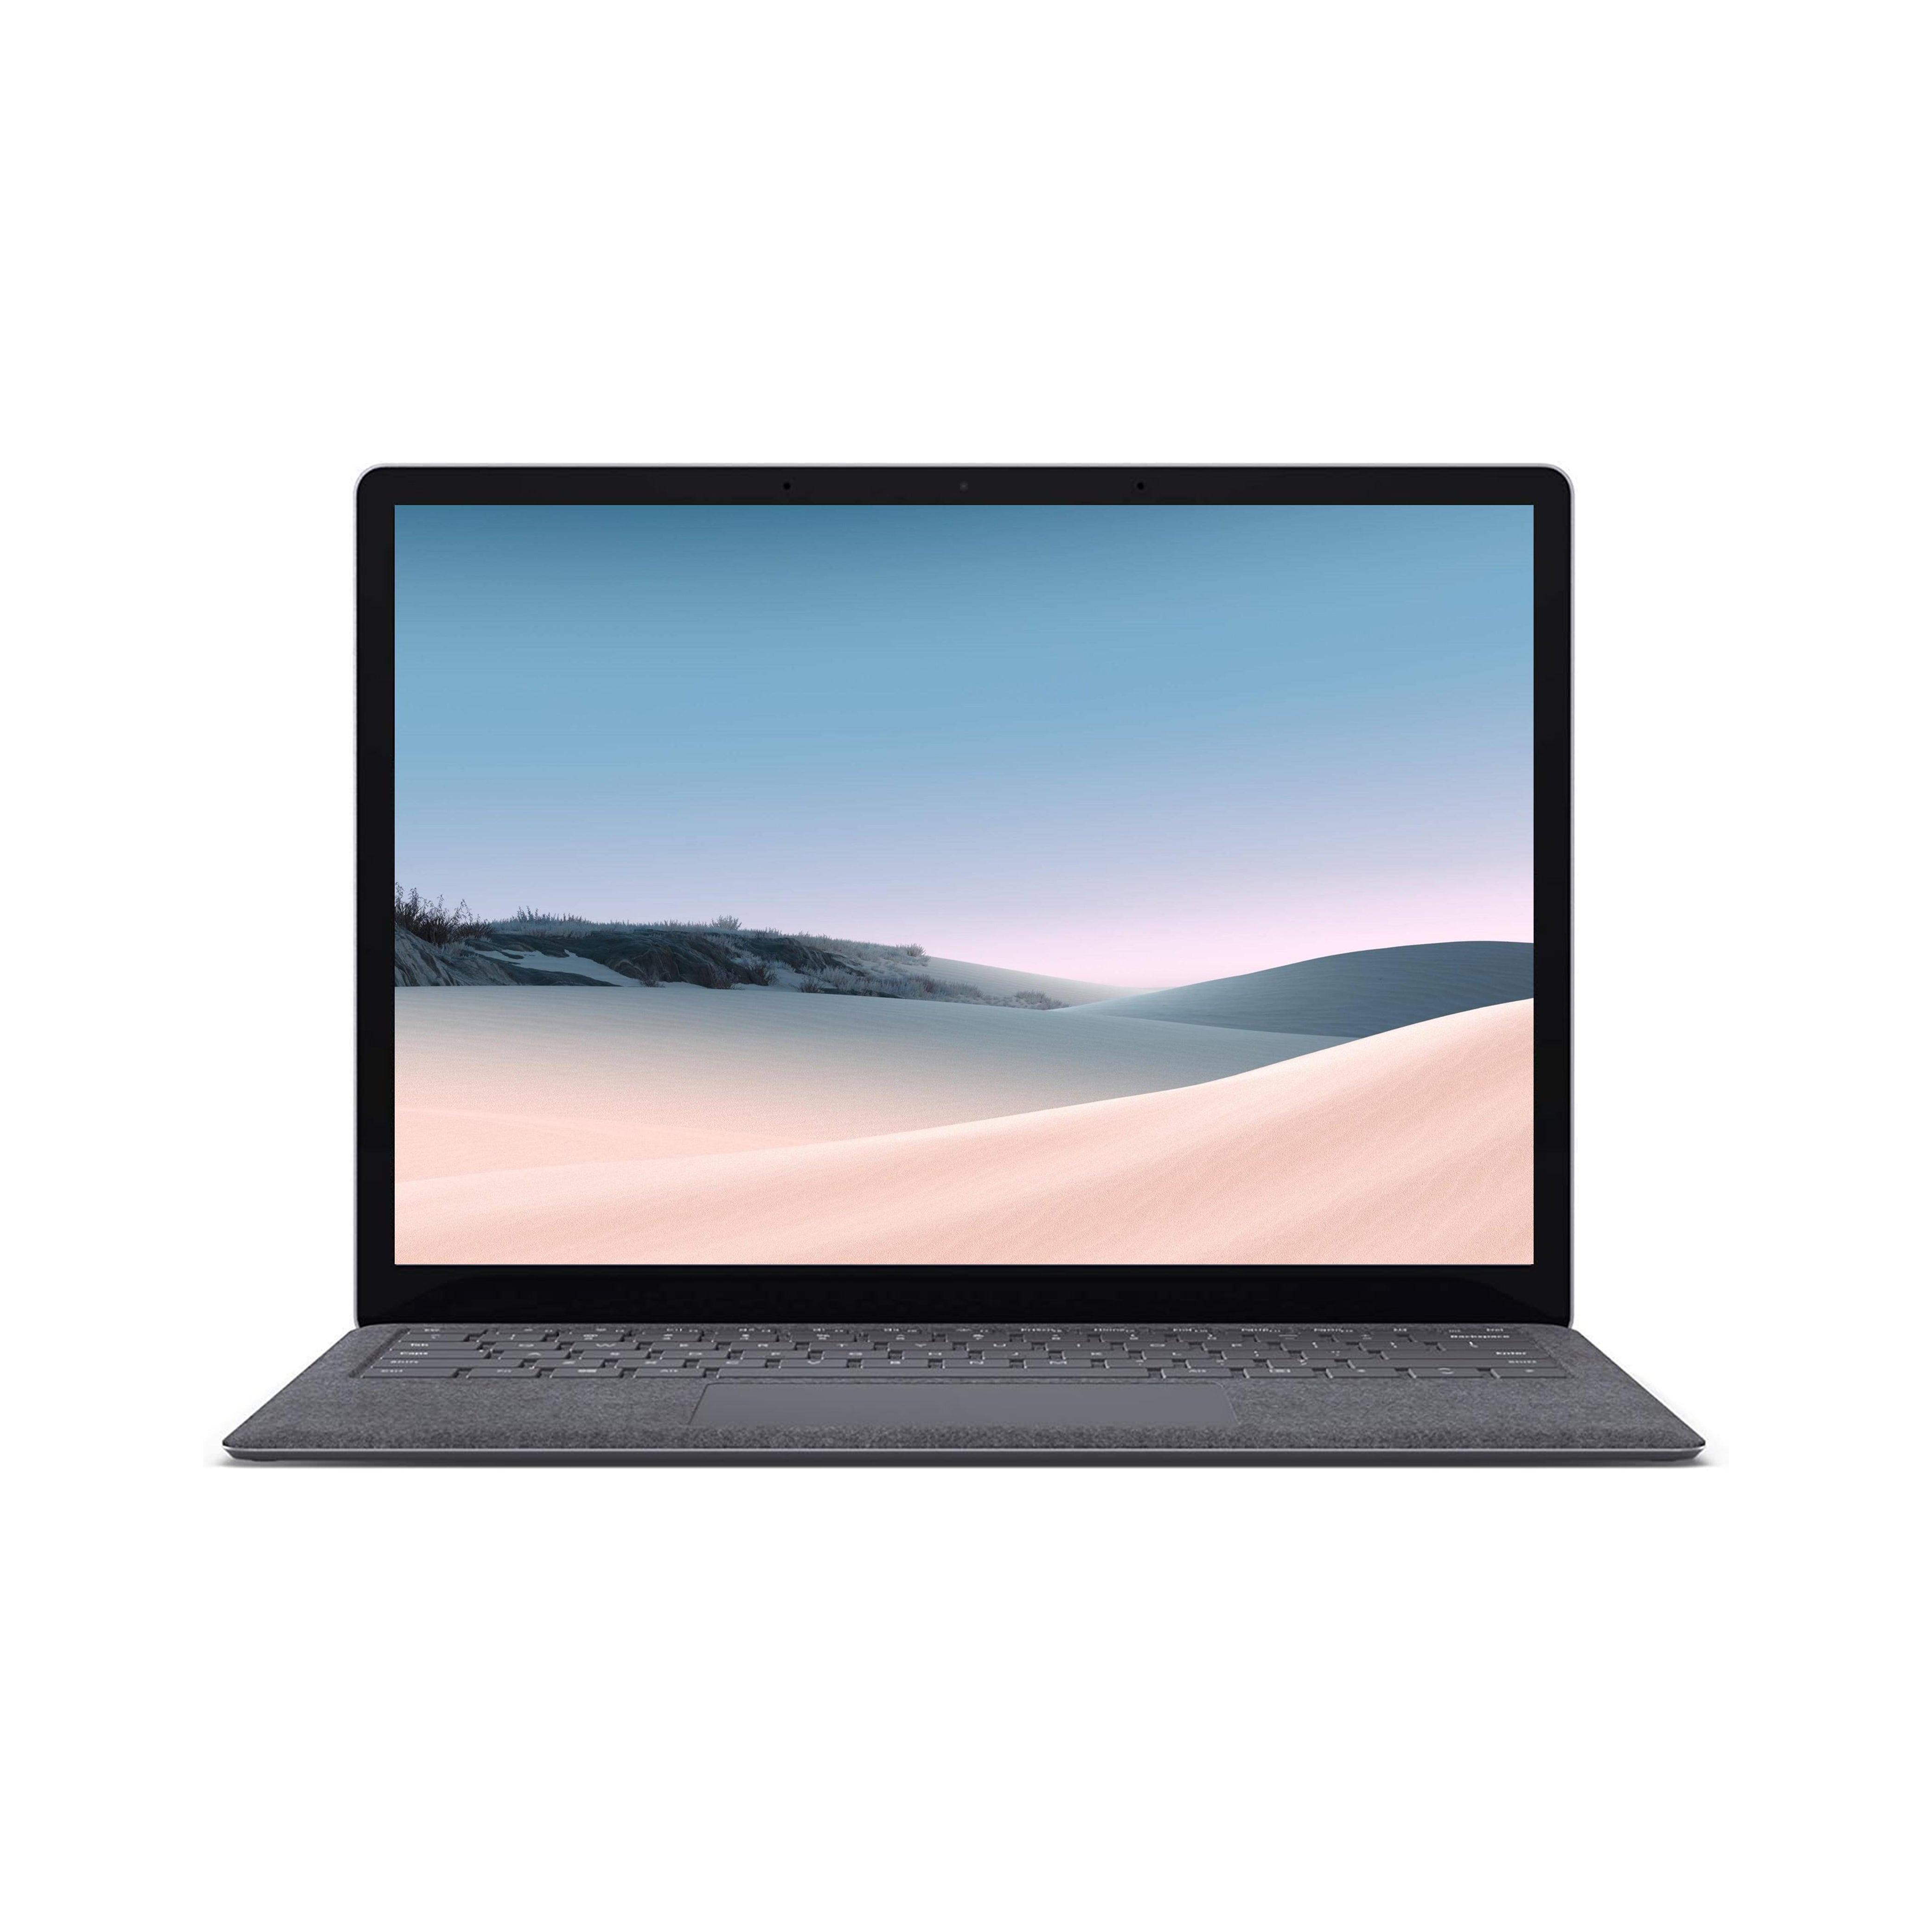 MICROSOFT Surface Laptop 3 Intel Core i5 10th Gen 1035G7 - (8 GB/128 GB  SSD/Windows 10 Home) 1867 Laptop Rs.104999 Price in India - Buy MICROSOFT  Surface Laptop 3 Intel Core i5